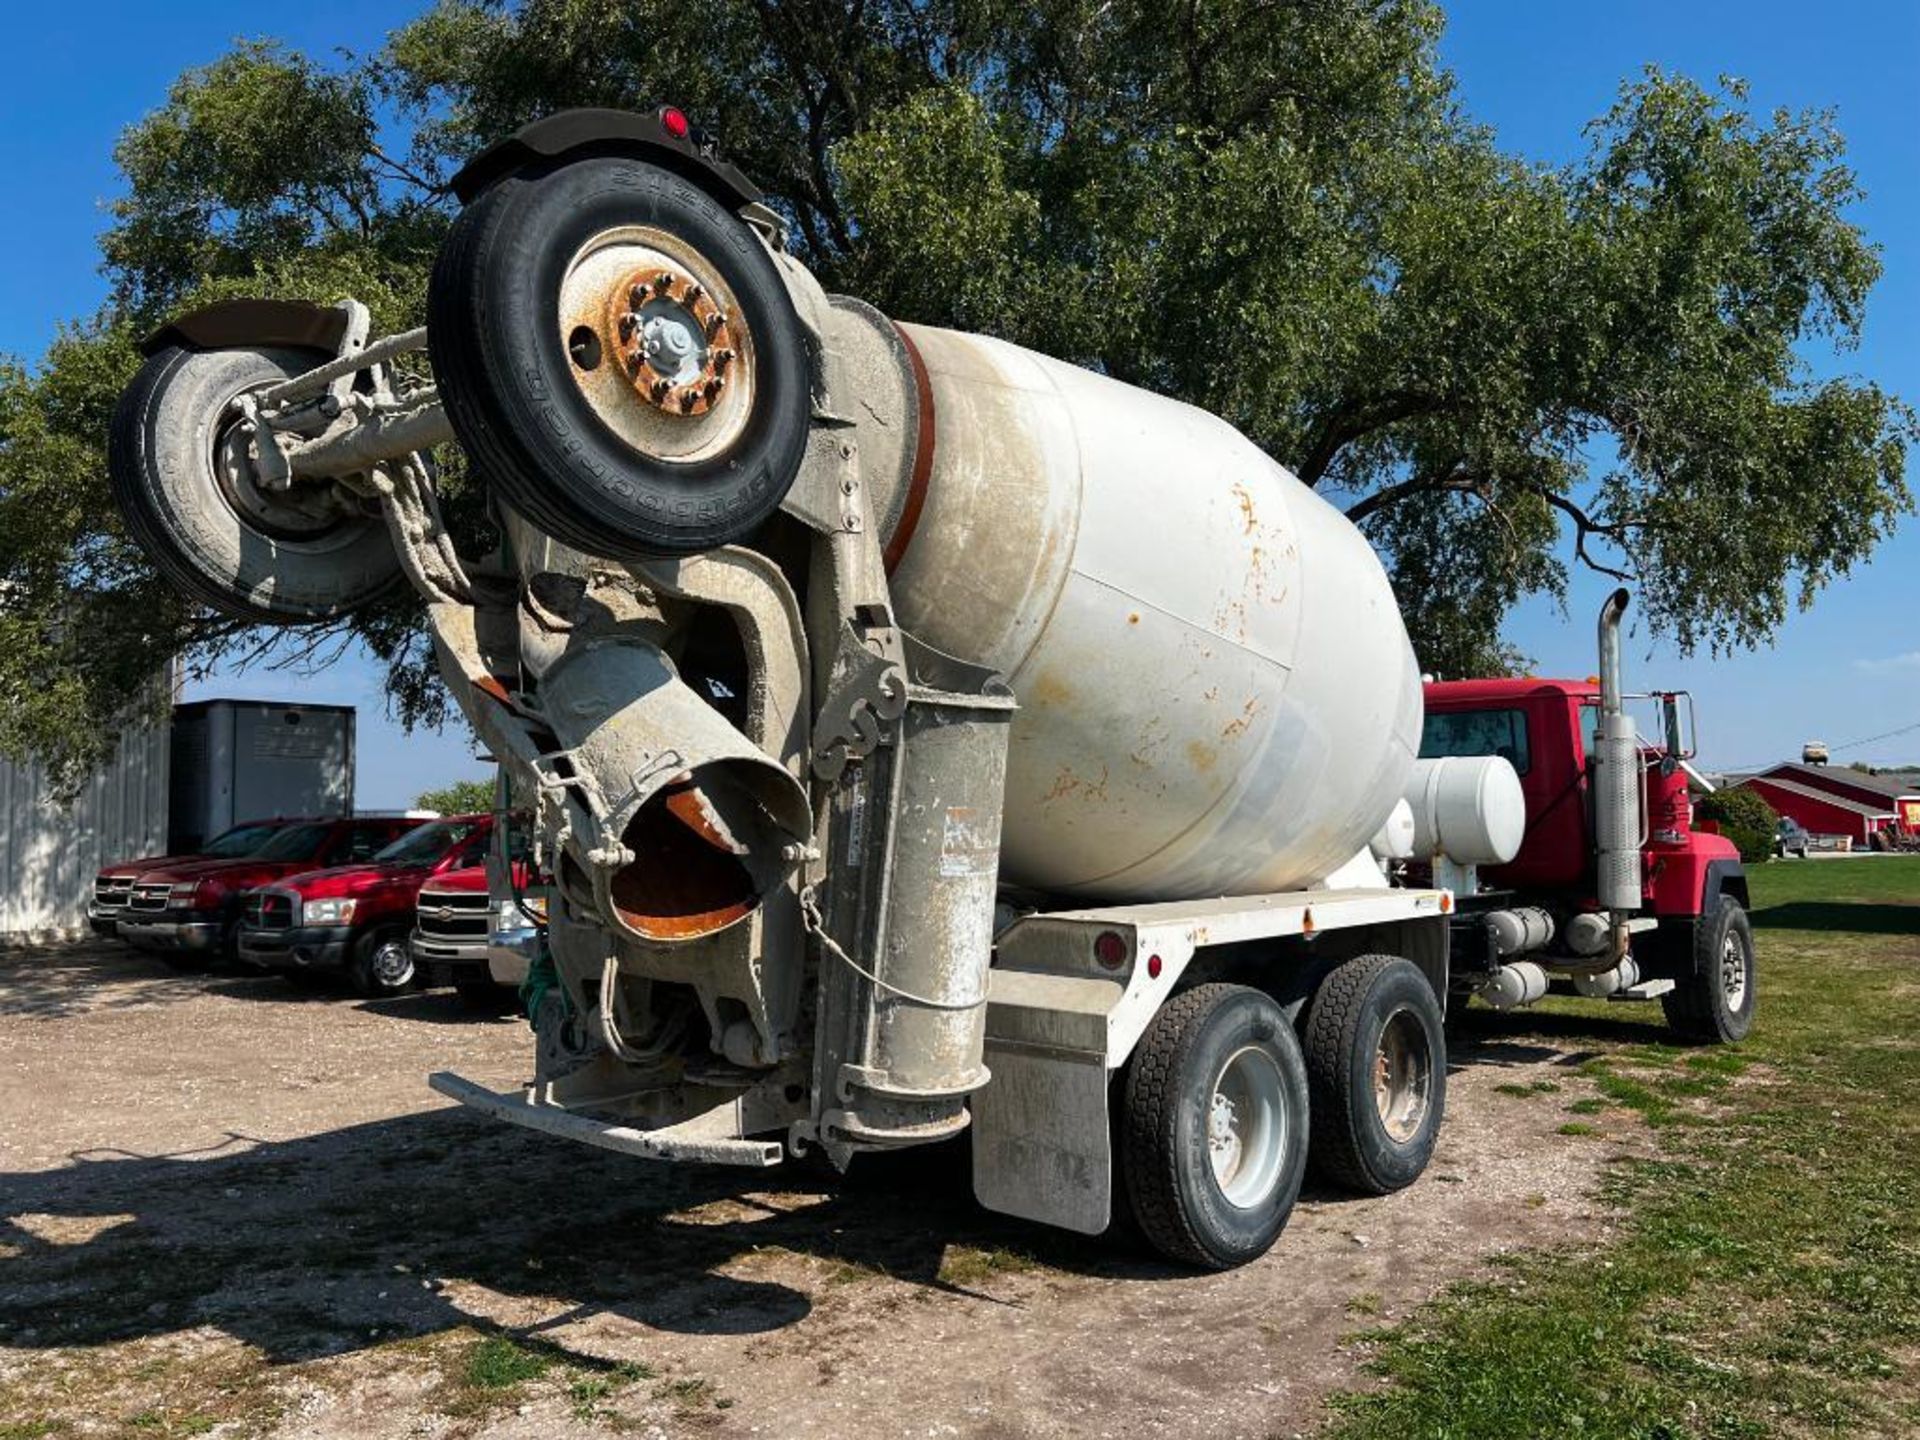 2001 Mack RD690S Concrete Mixer Truck, NON-RUNNING, miles showing: 92k, hours showing: 19,109, Eaton - Image 4 of 17